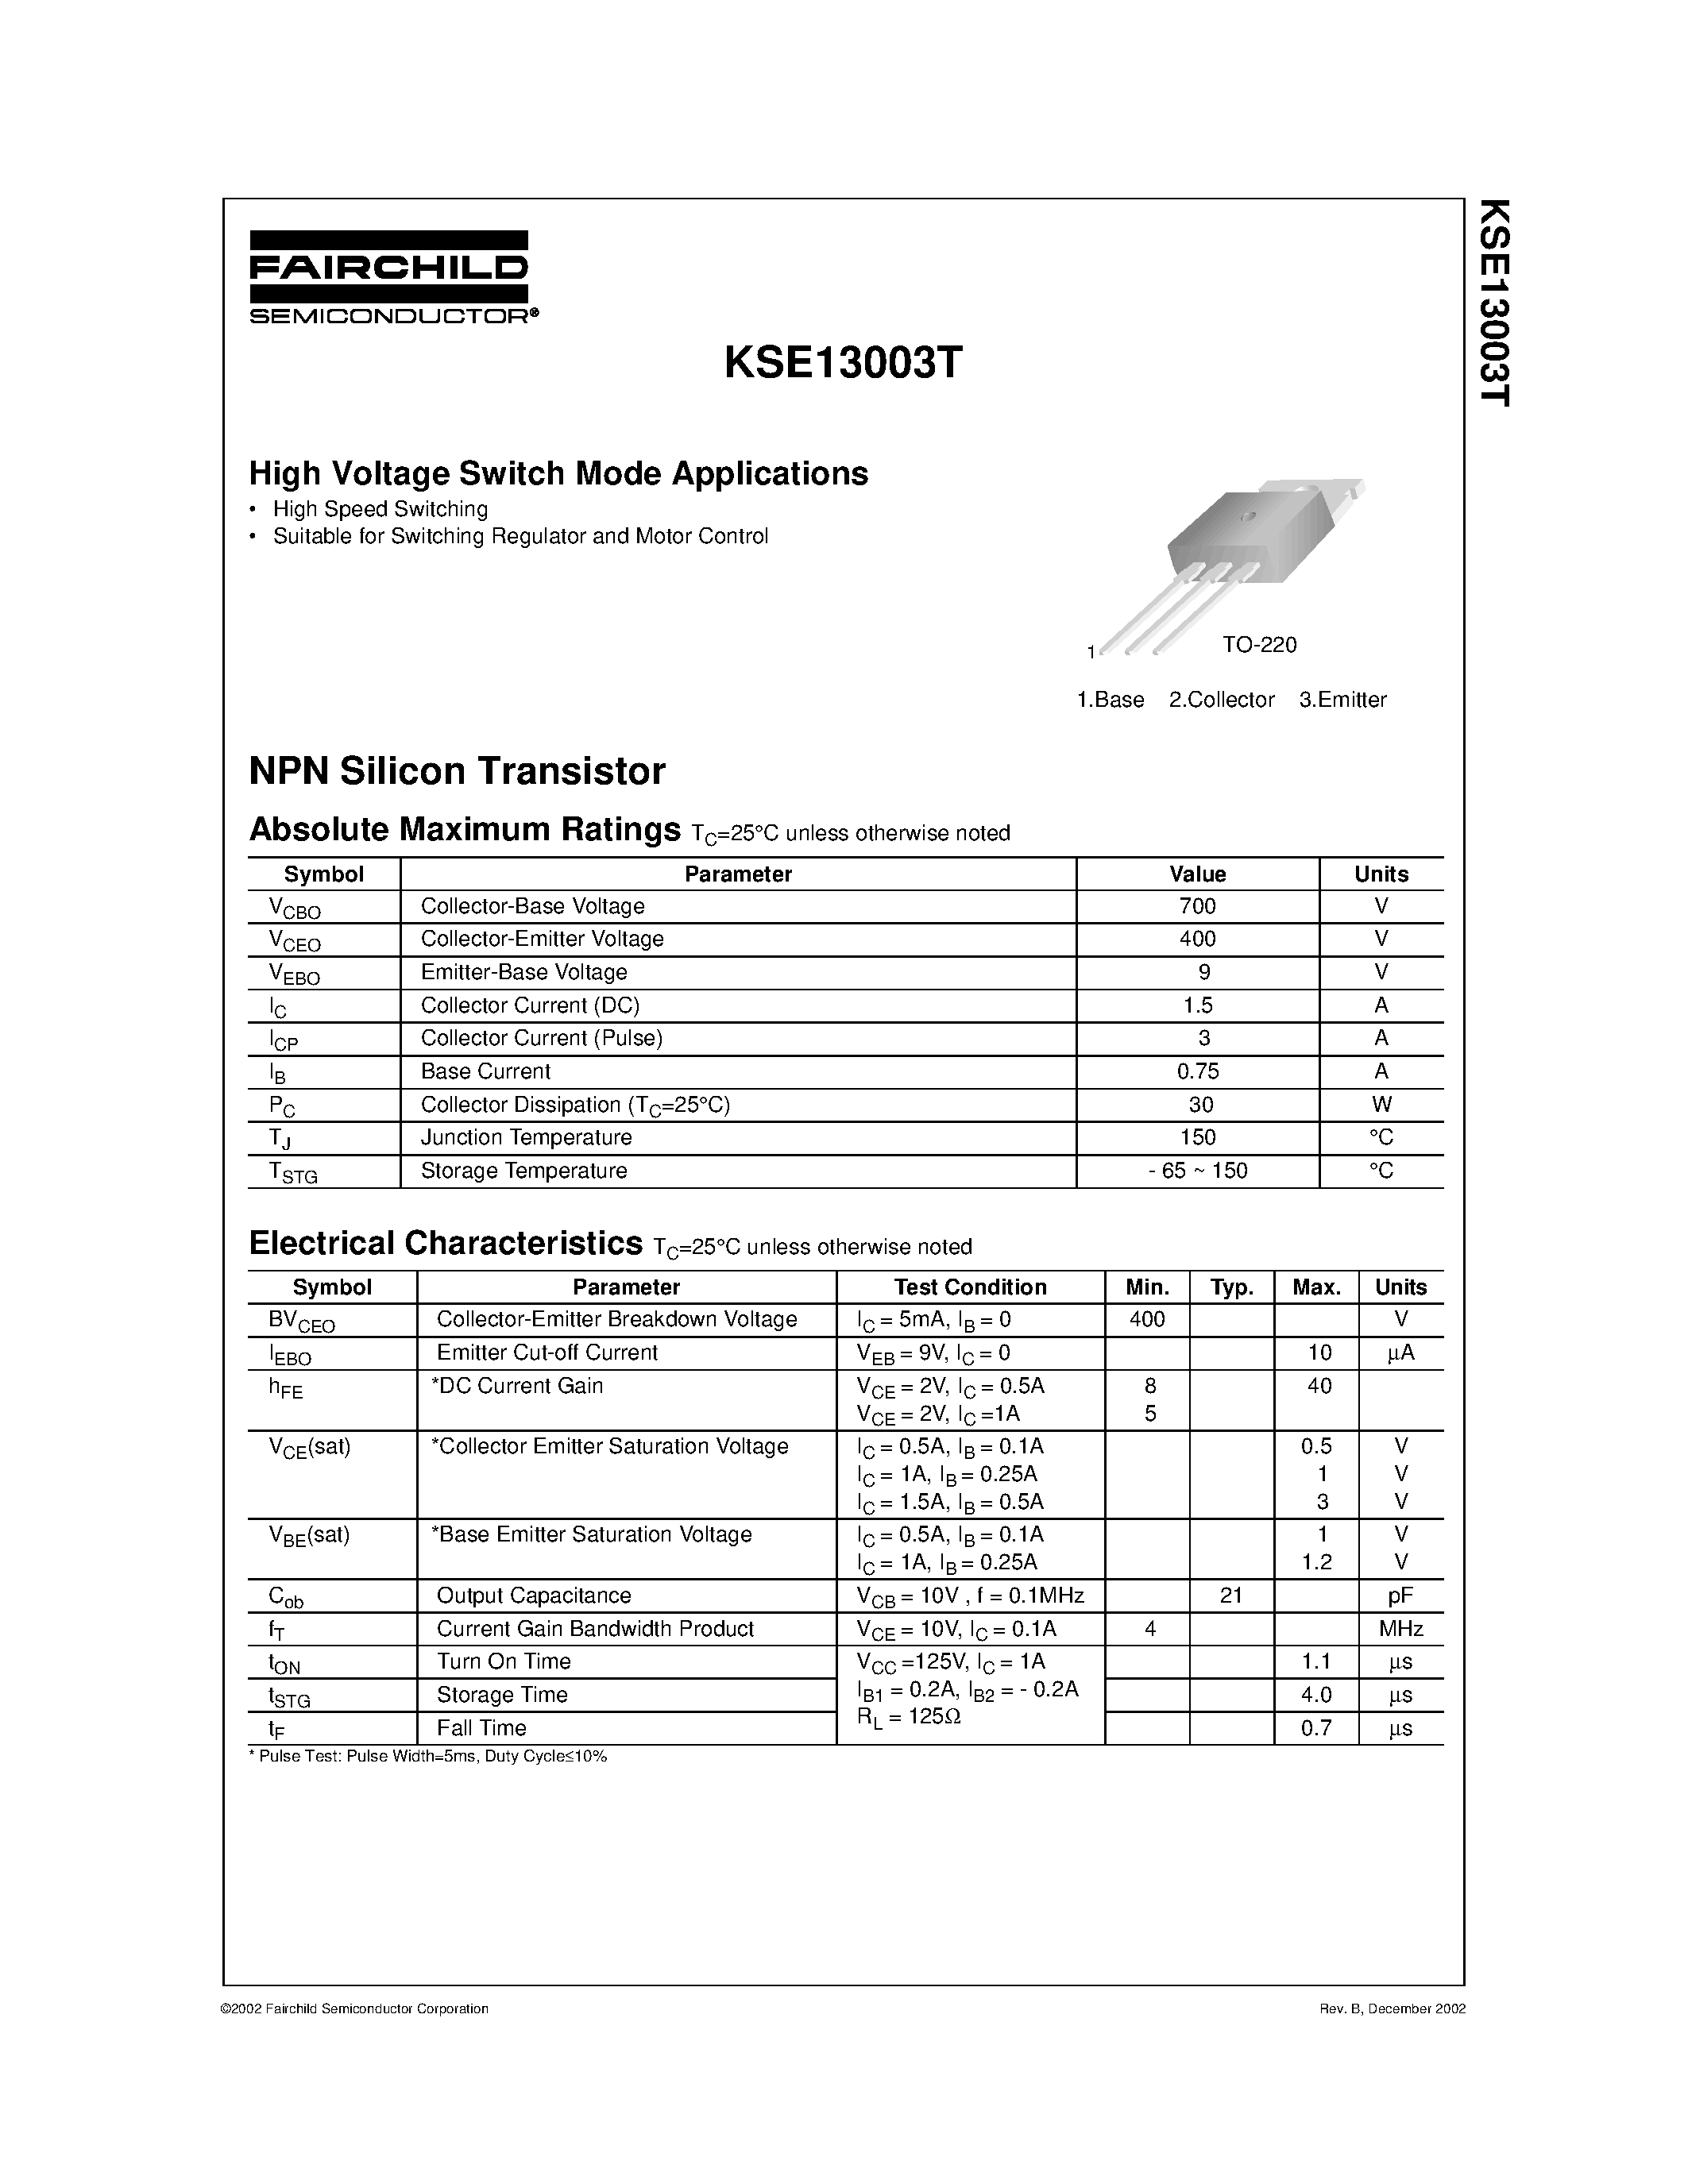 Datasheet KSE13003T - High Voltage Switch Mode Applications page 1